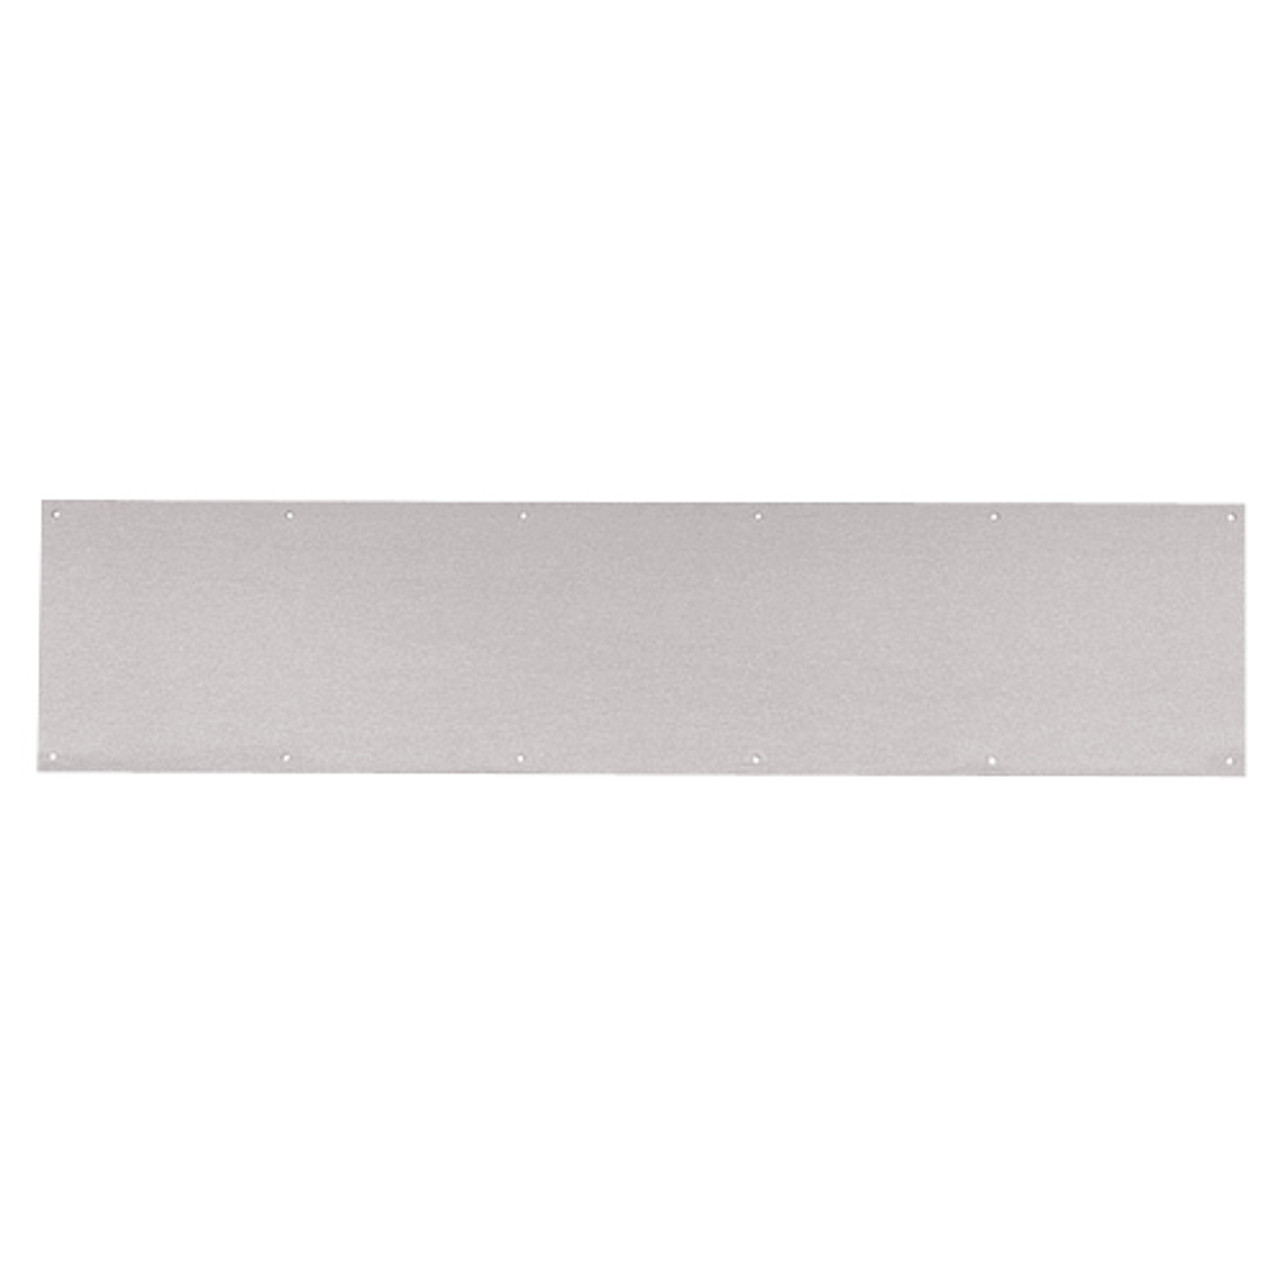 8400-US32D-10x32-B-CS Ives 8400 Series Protection Plate in Satin Stainless Steel